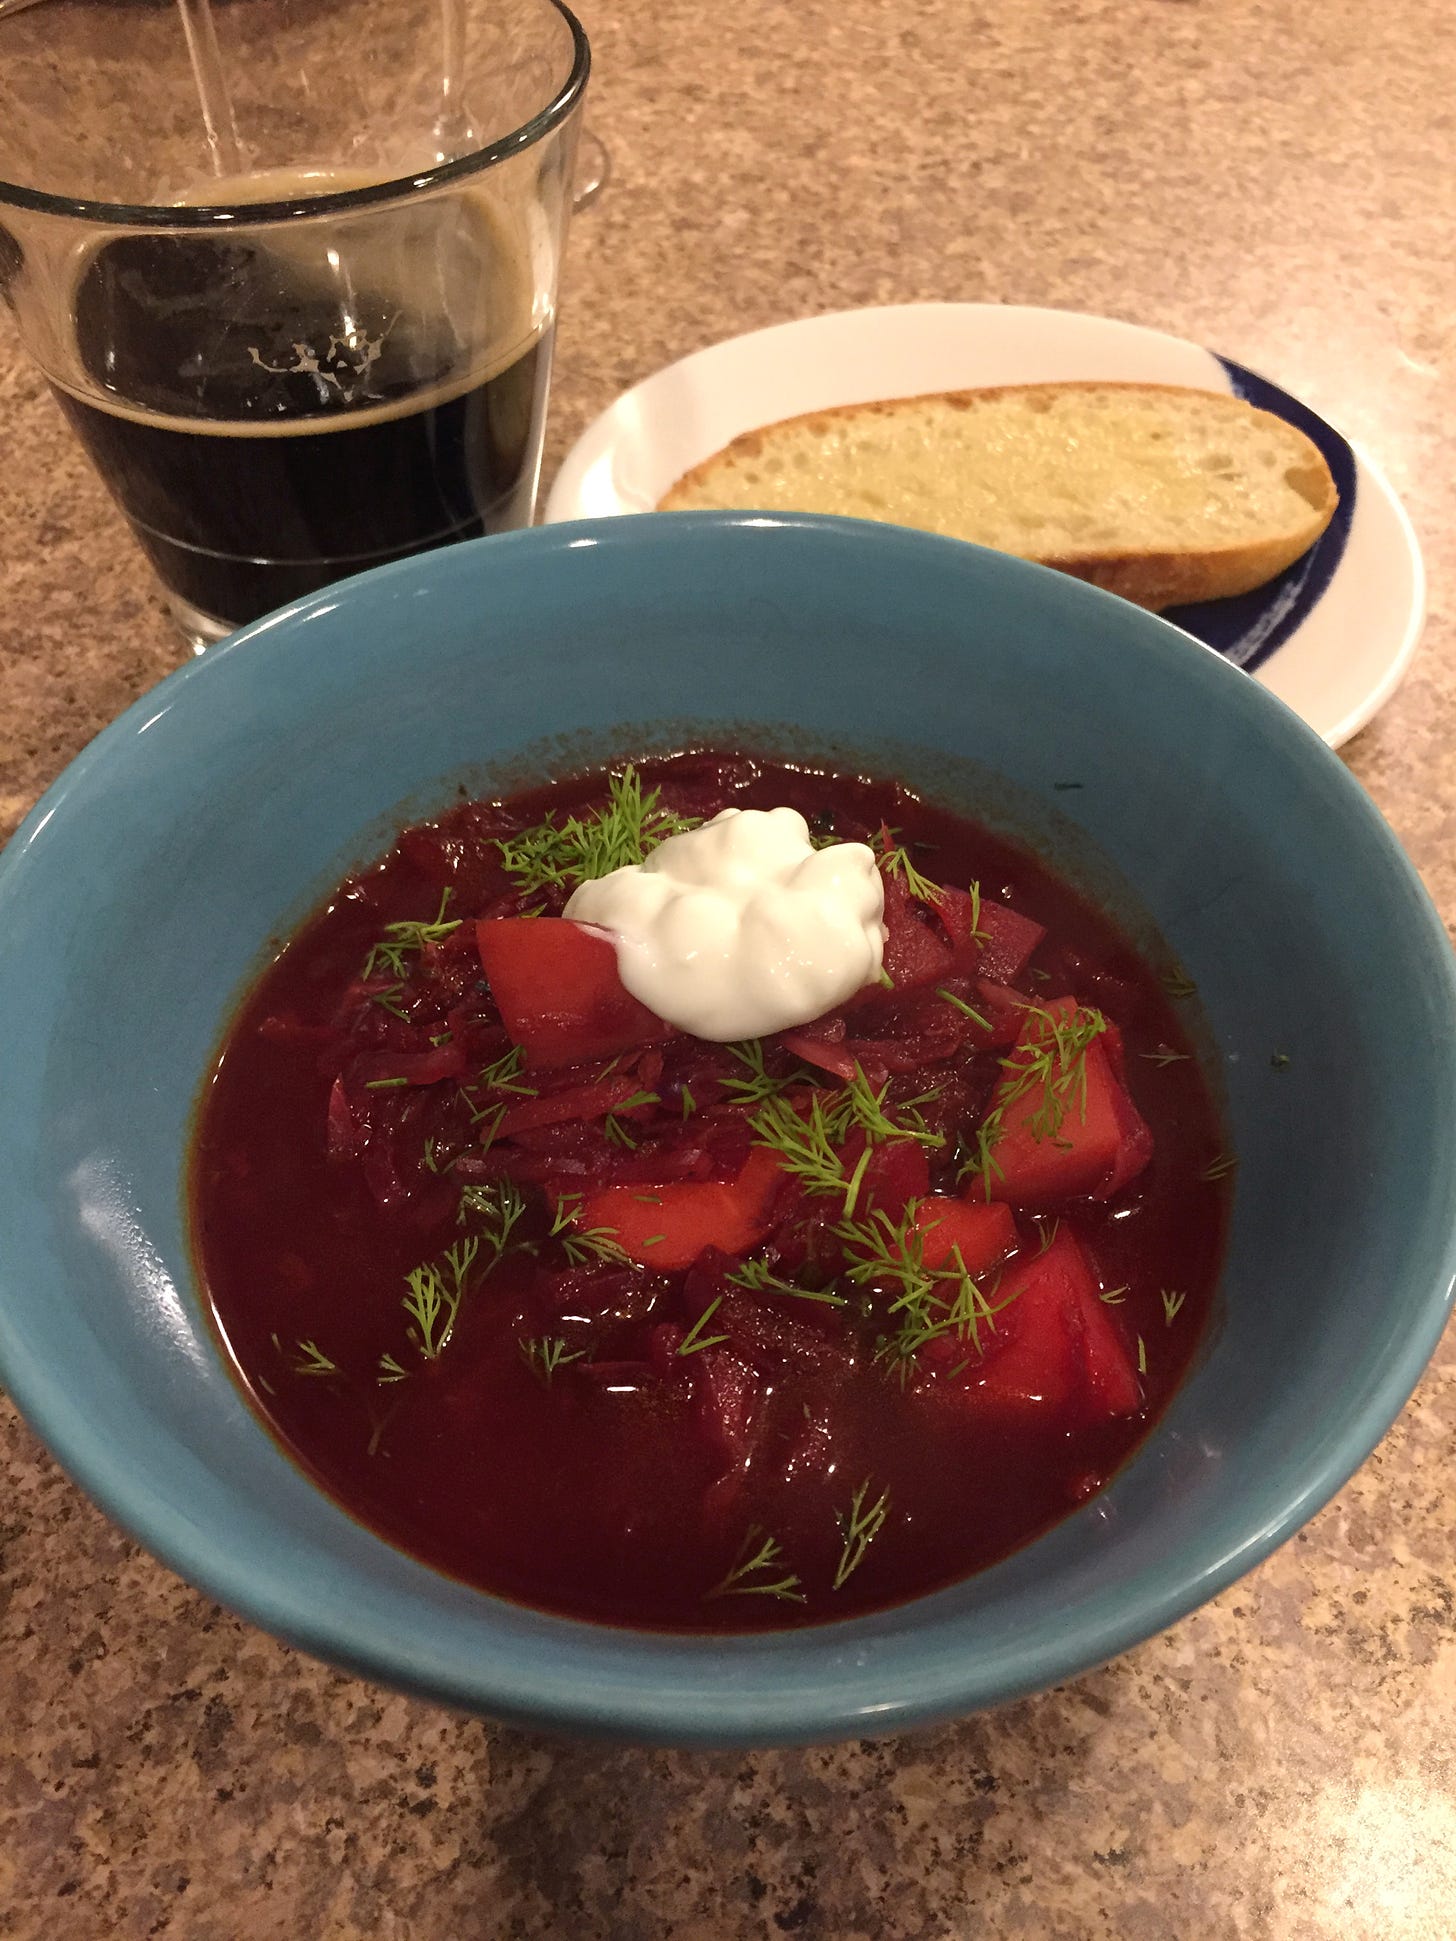 A blue bowl of borscht in the foreground, topped with chopped dill and a dollop of sour cream. Behind it is a small plate with a piece of sourdough toast, and a glass of dark beer.